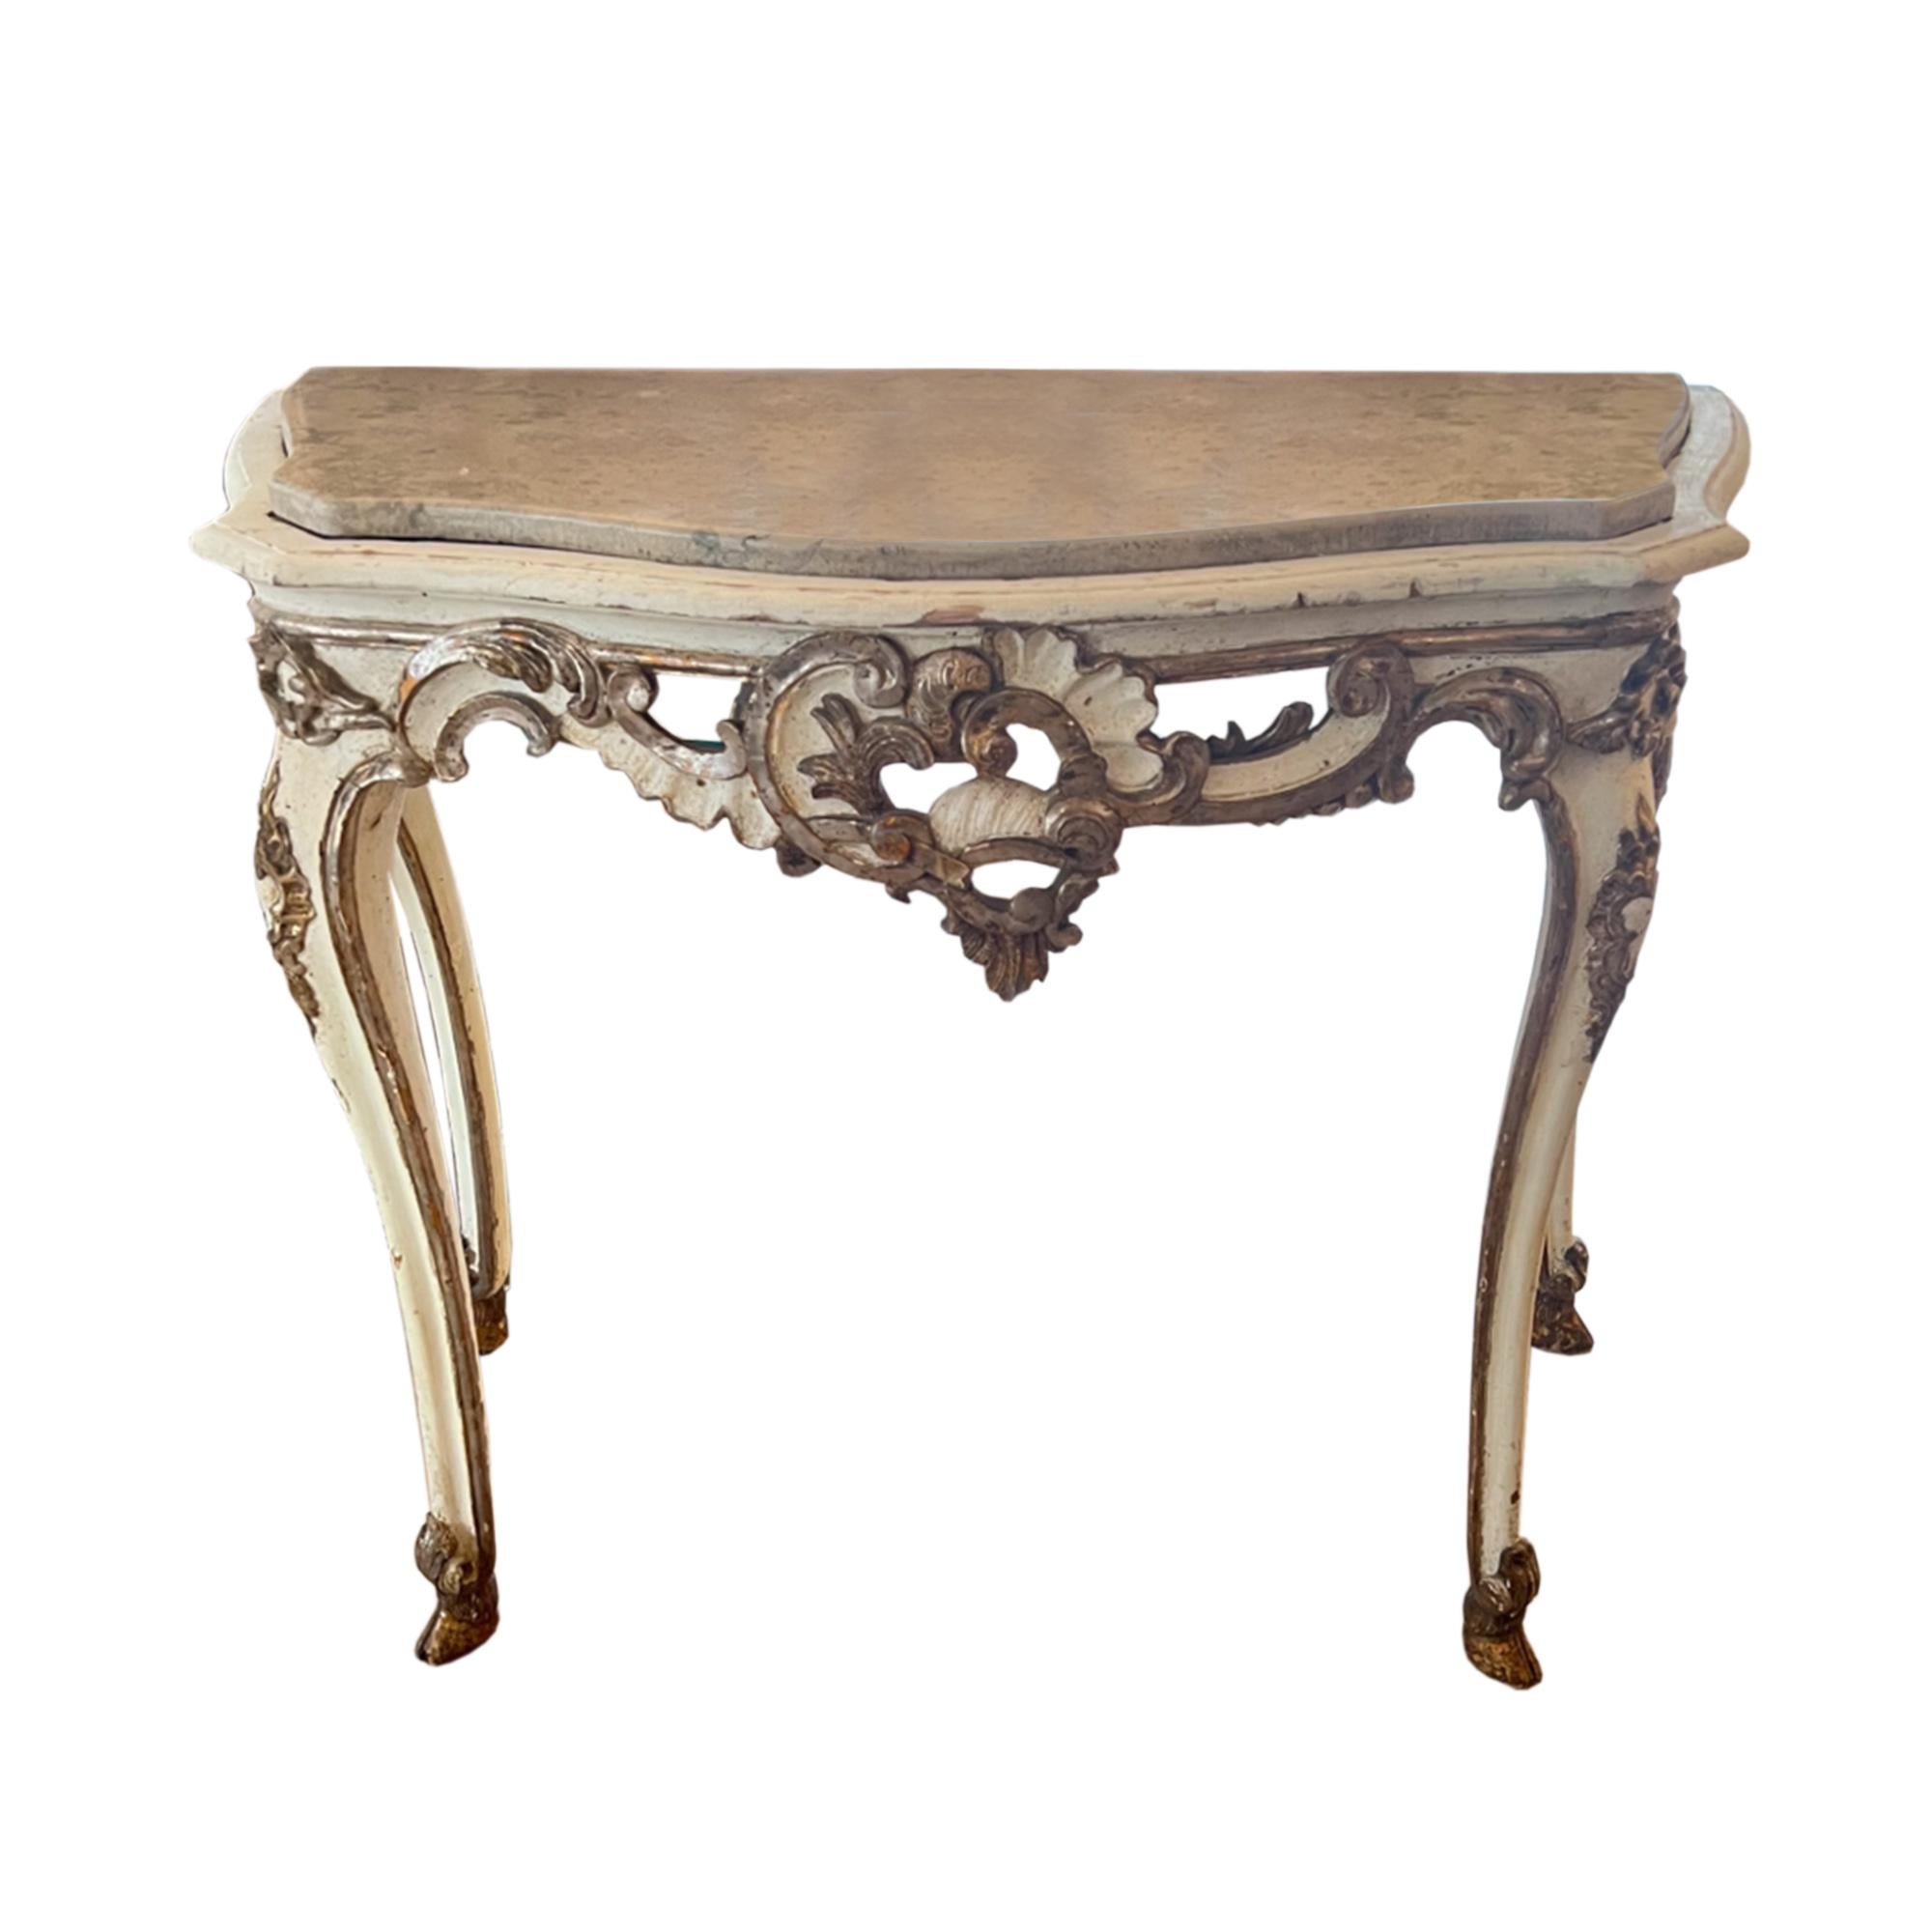 A spectacular pair of rococco console tables - they were made in Italy in the late 18th century. 

Please take a look at all our photographs to see the detailed carving and later marble tops.

Giltwood with silver leaf and white paint. 

Finished